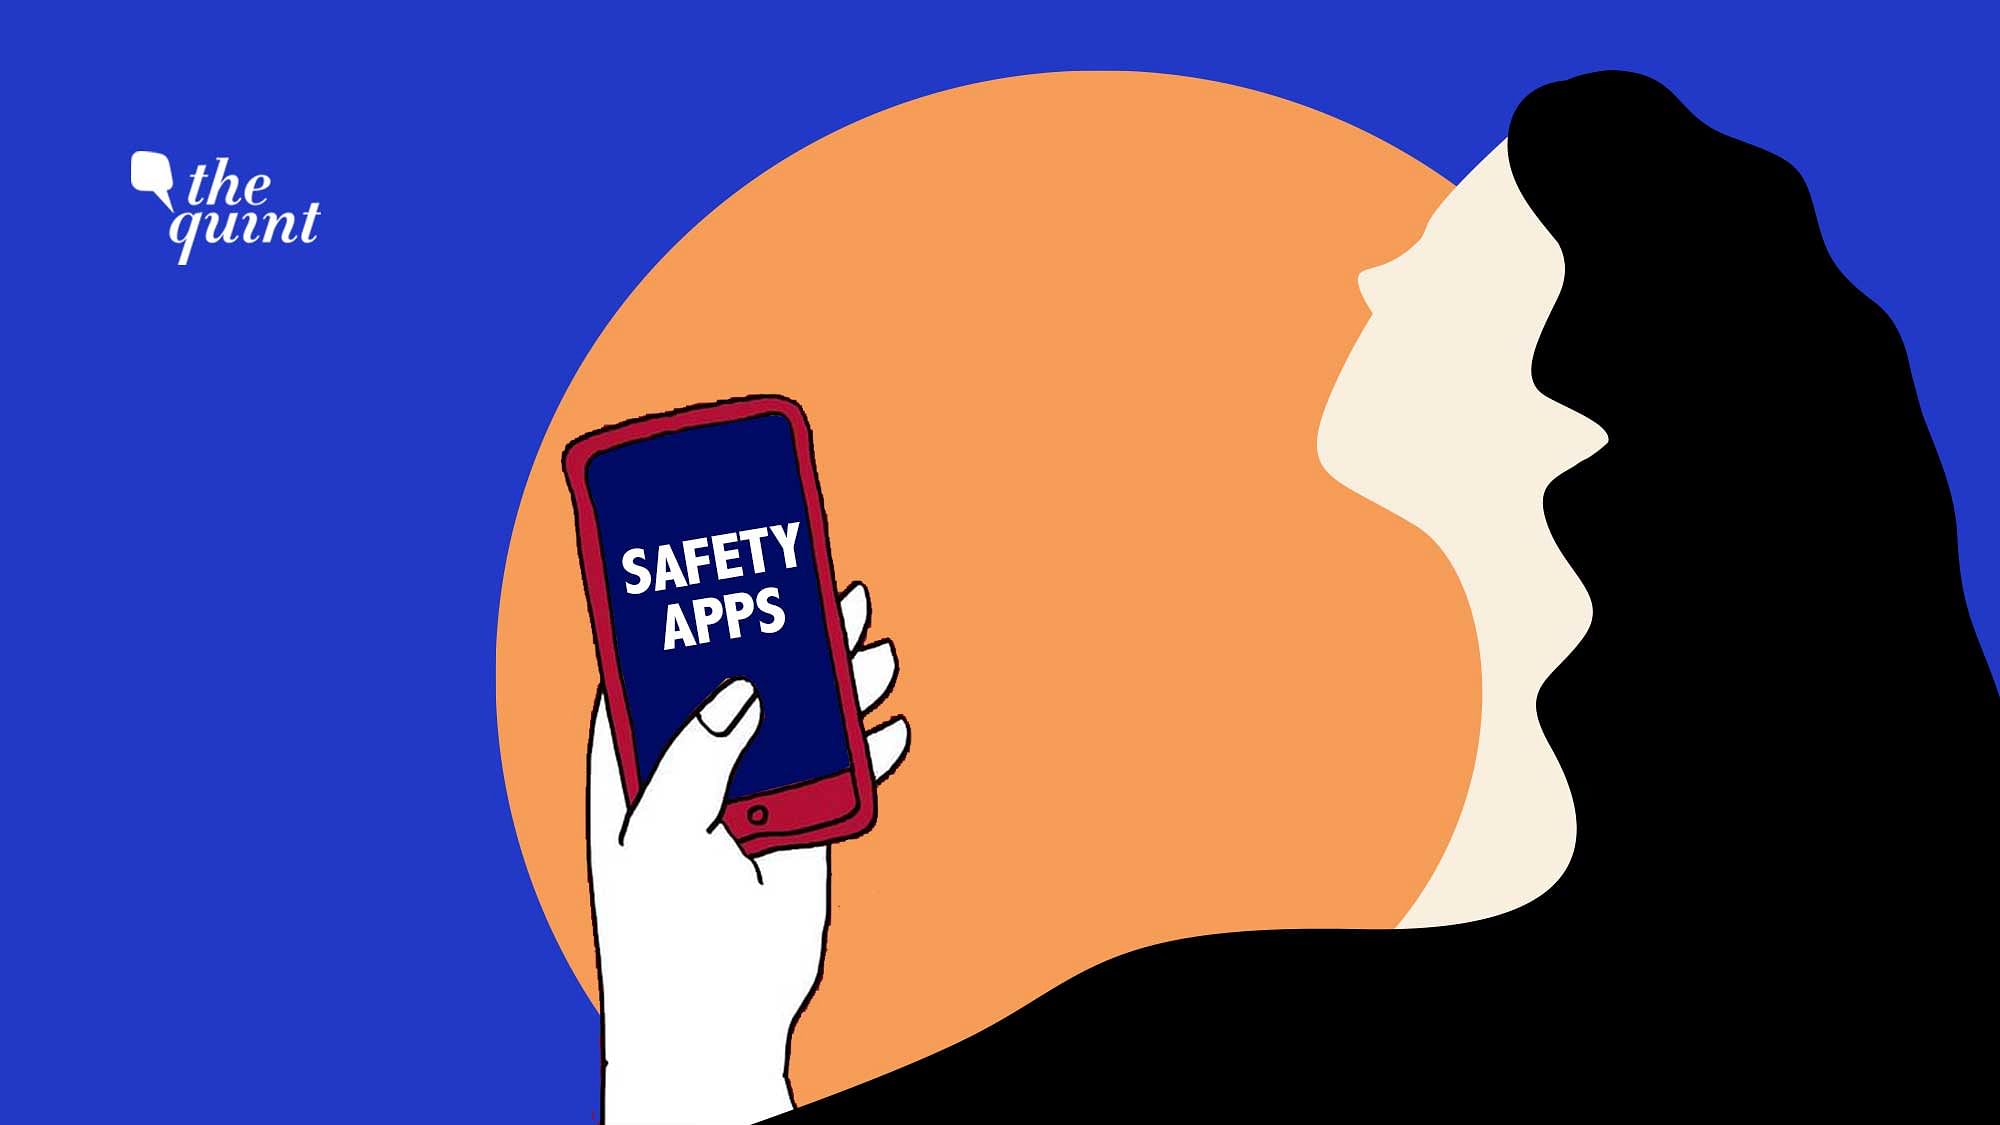 In many parts in India, support and help with regard to women’s safety is not just a click away.